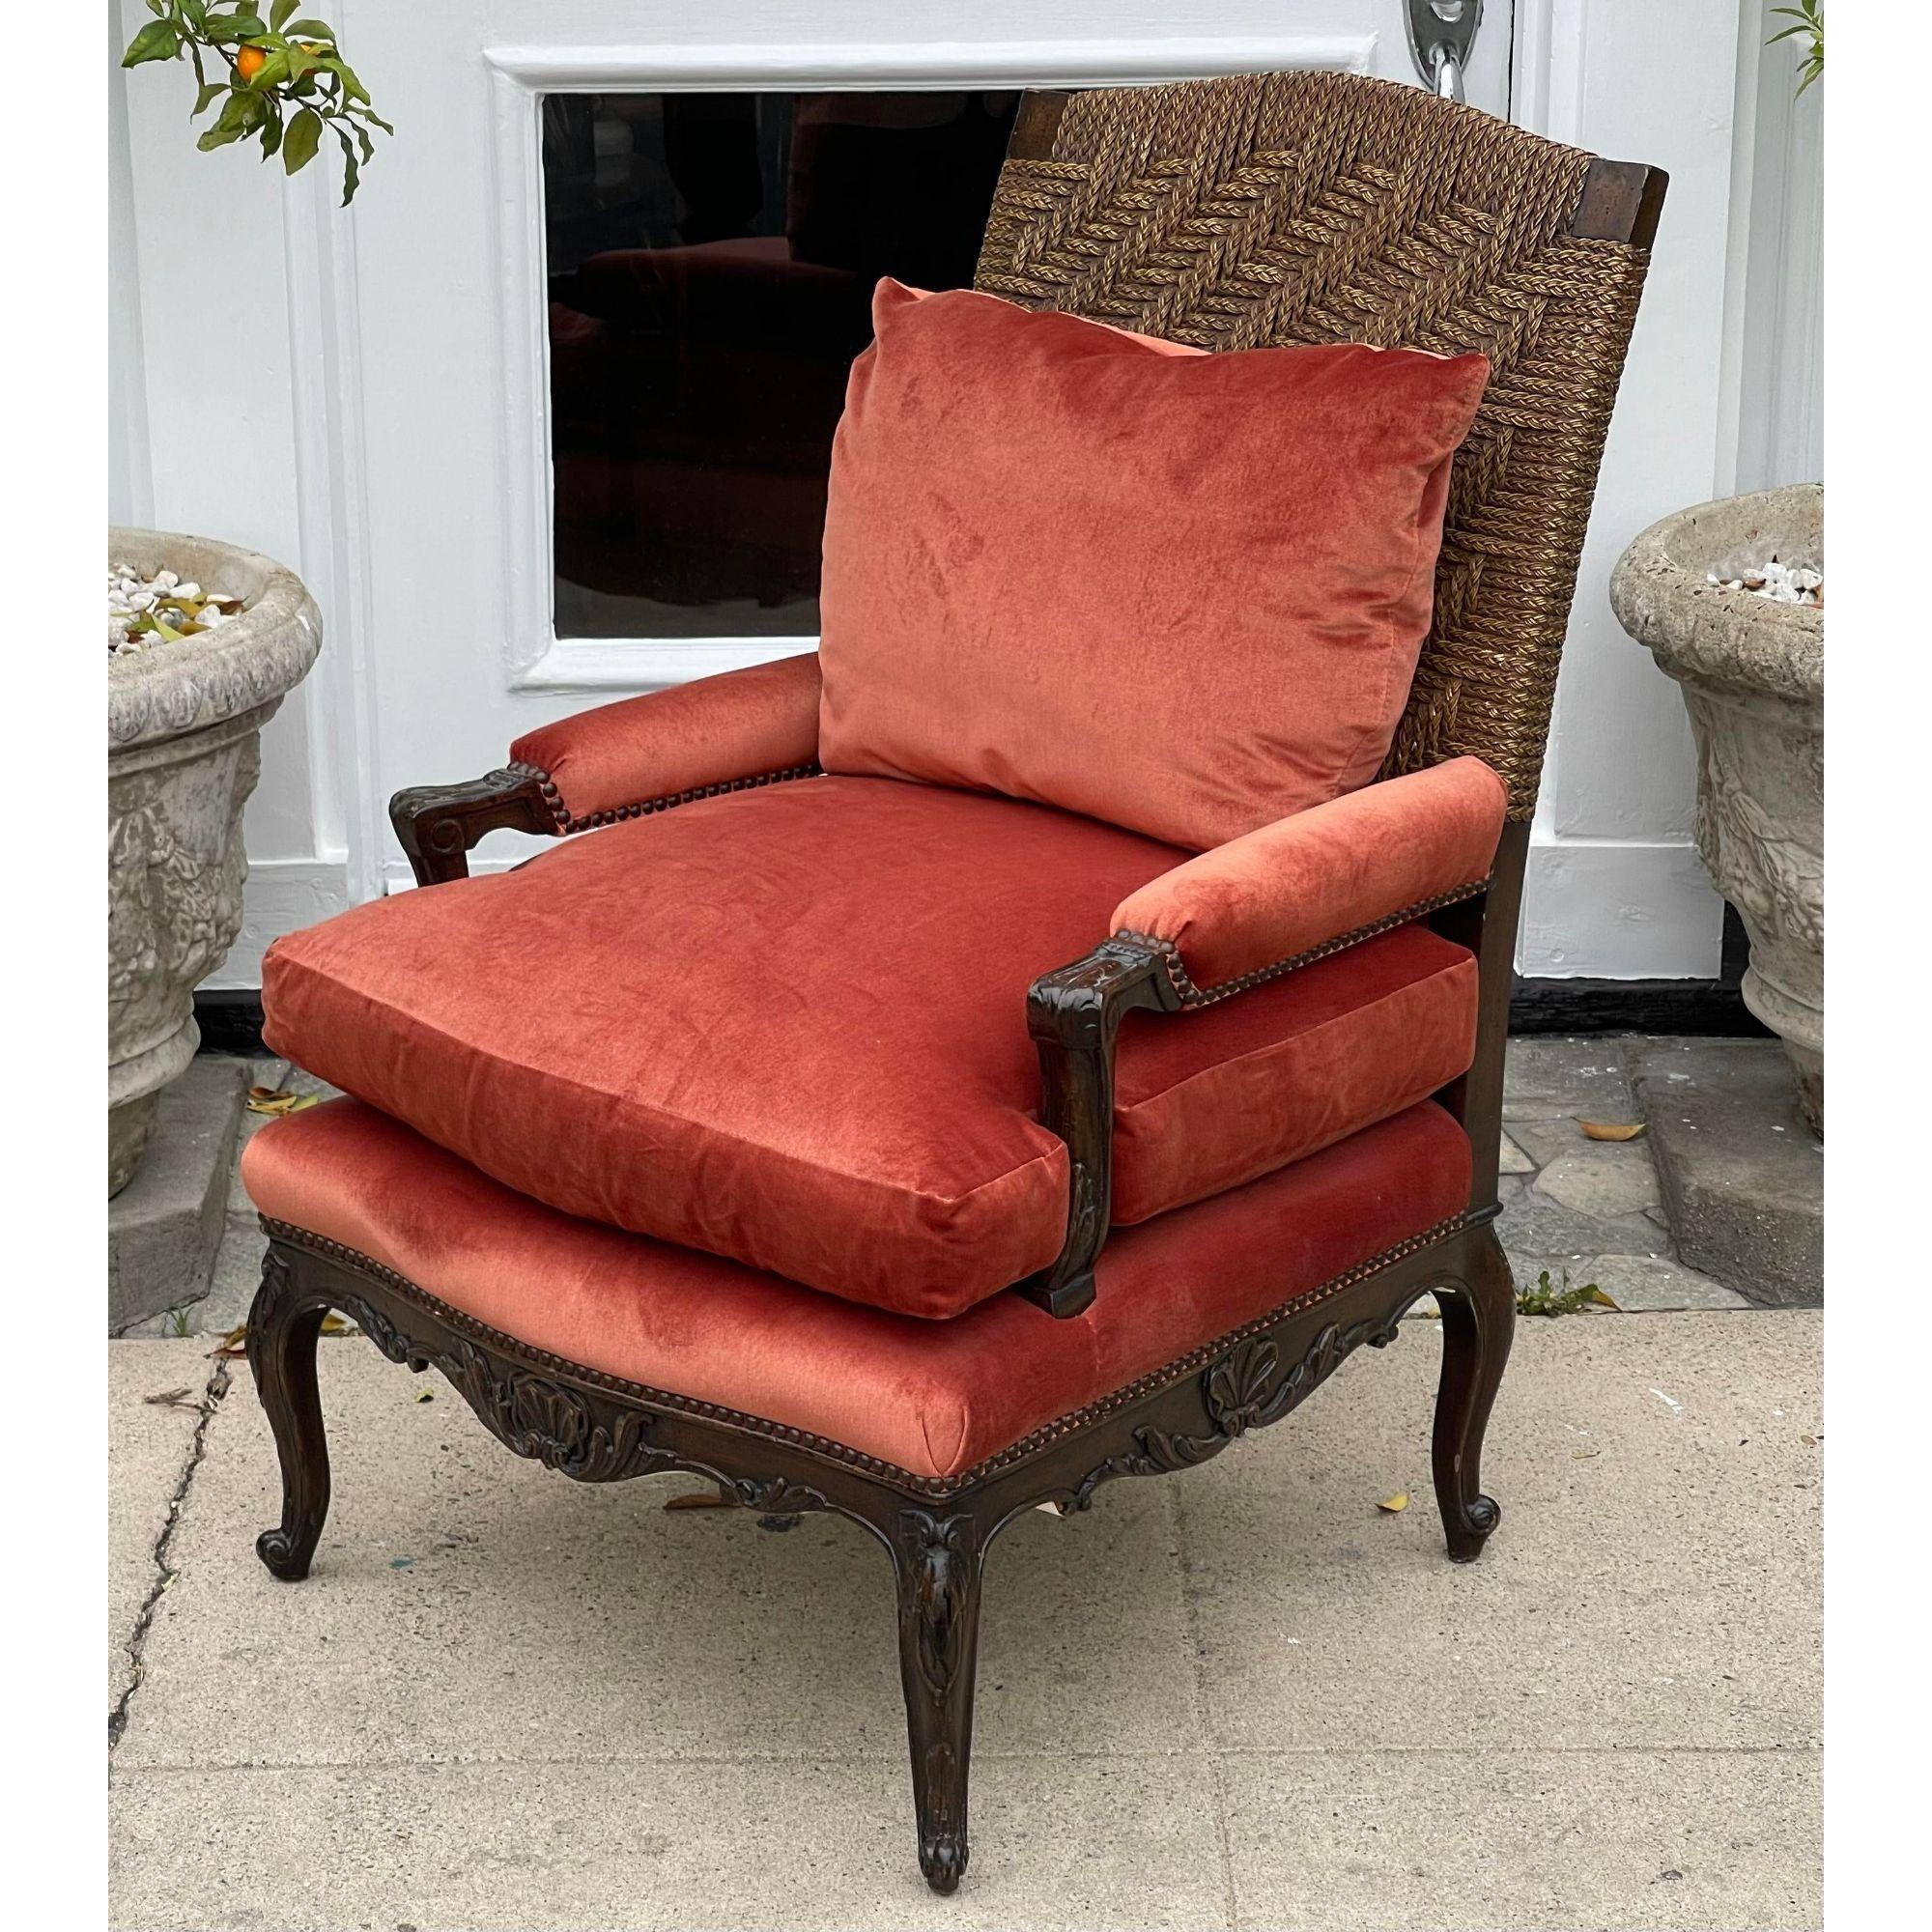 Antique carved walnut bergere chair & ottoman Duchesse brisee 2 piece chaise.

Additional information: 
Materials: Walnut 
Color: Burnt Orange
Period: 19th Century
Styles: French, Italian
Number of Seats: 1
Item Type: Vintage, Antique or